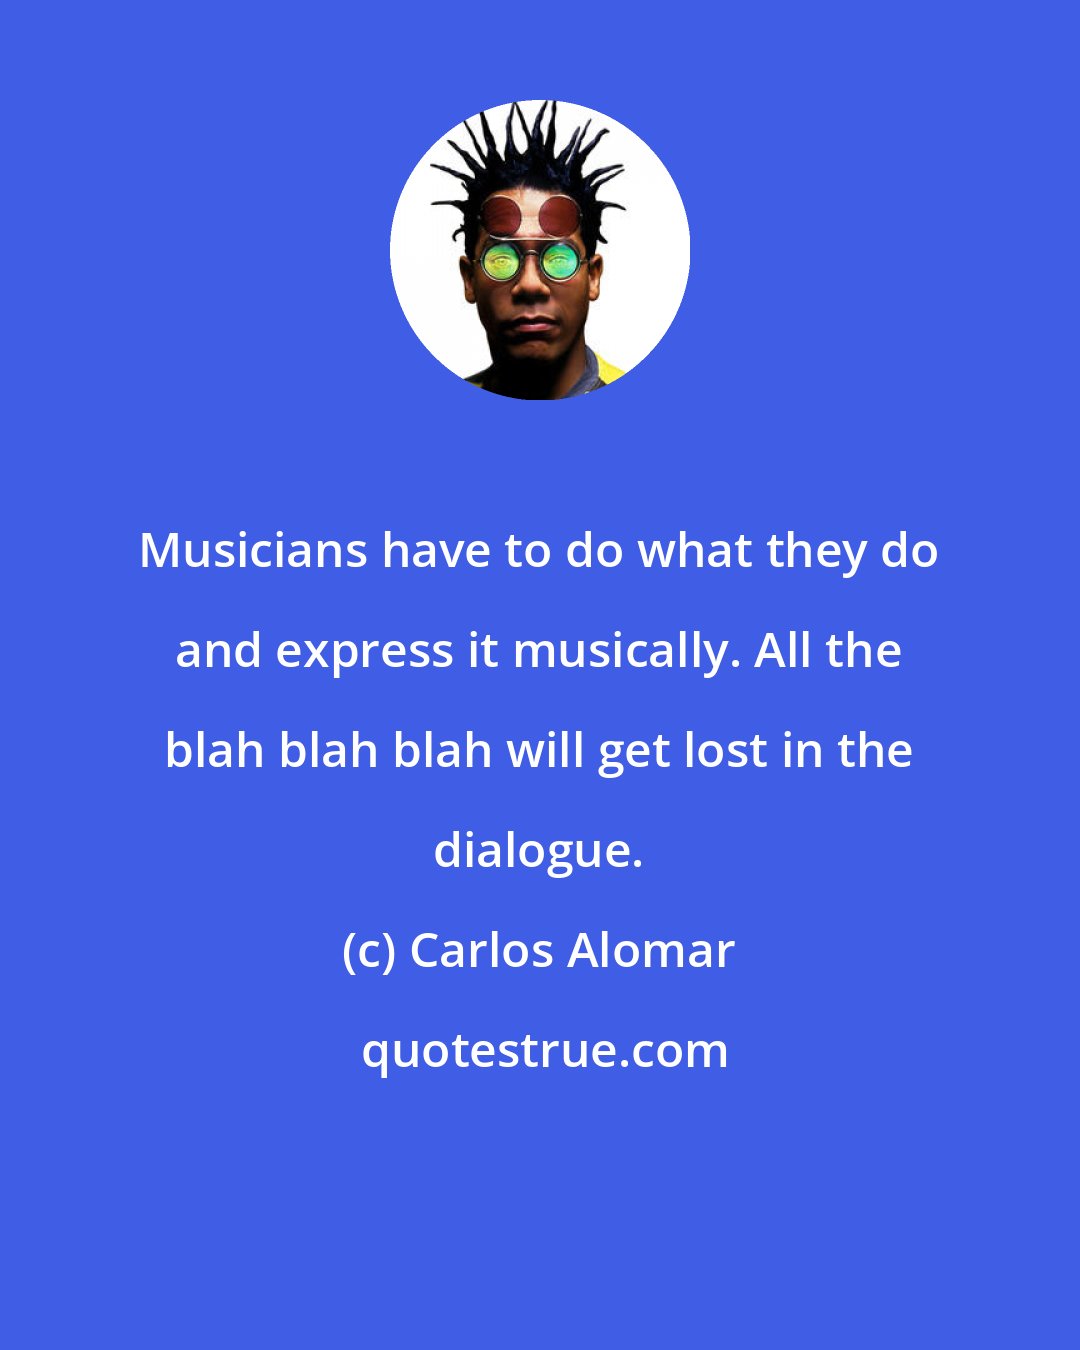 Carlos Alomar: Musicians have to do what they do and express it musically. All the blah blah blah will get lost in the dialogue.